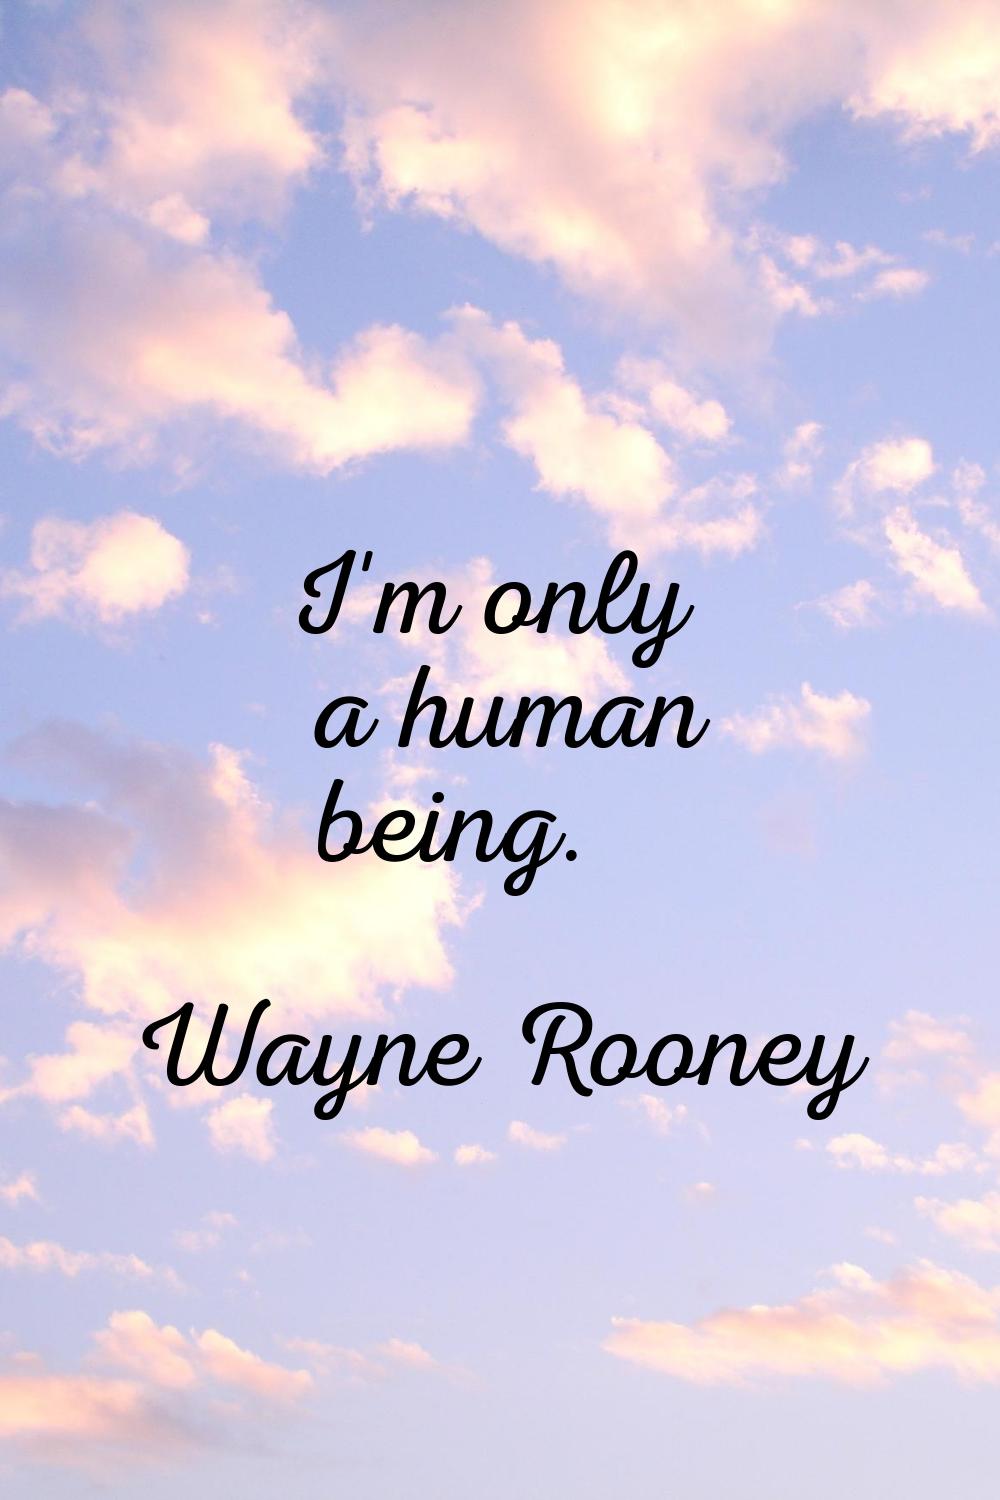 I'm only a human being.